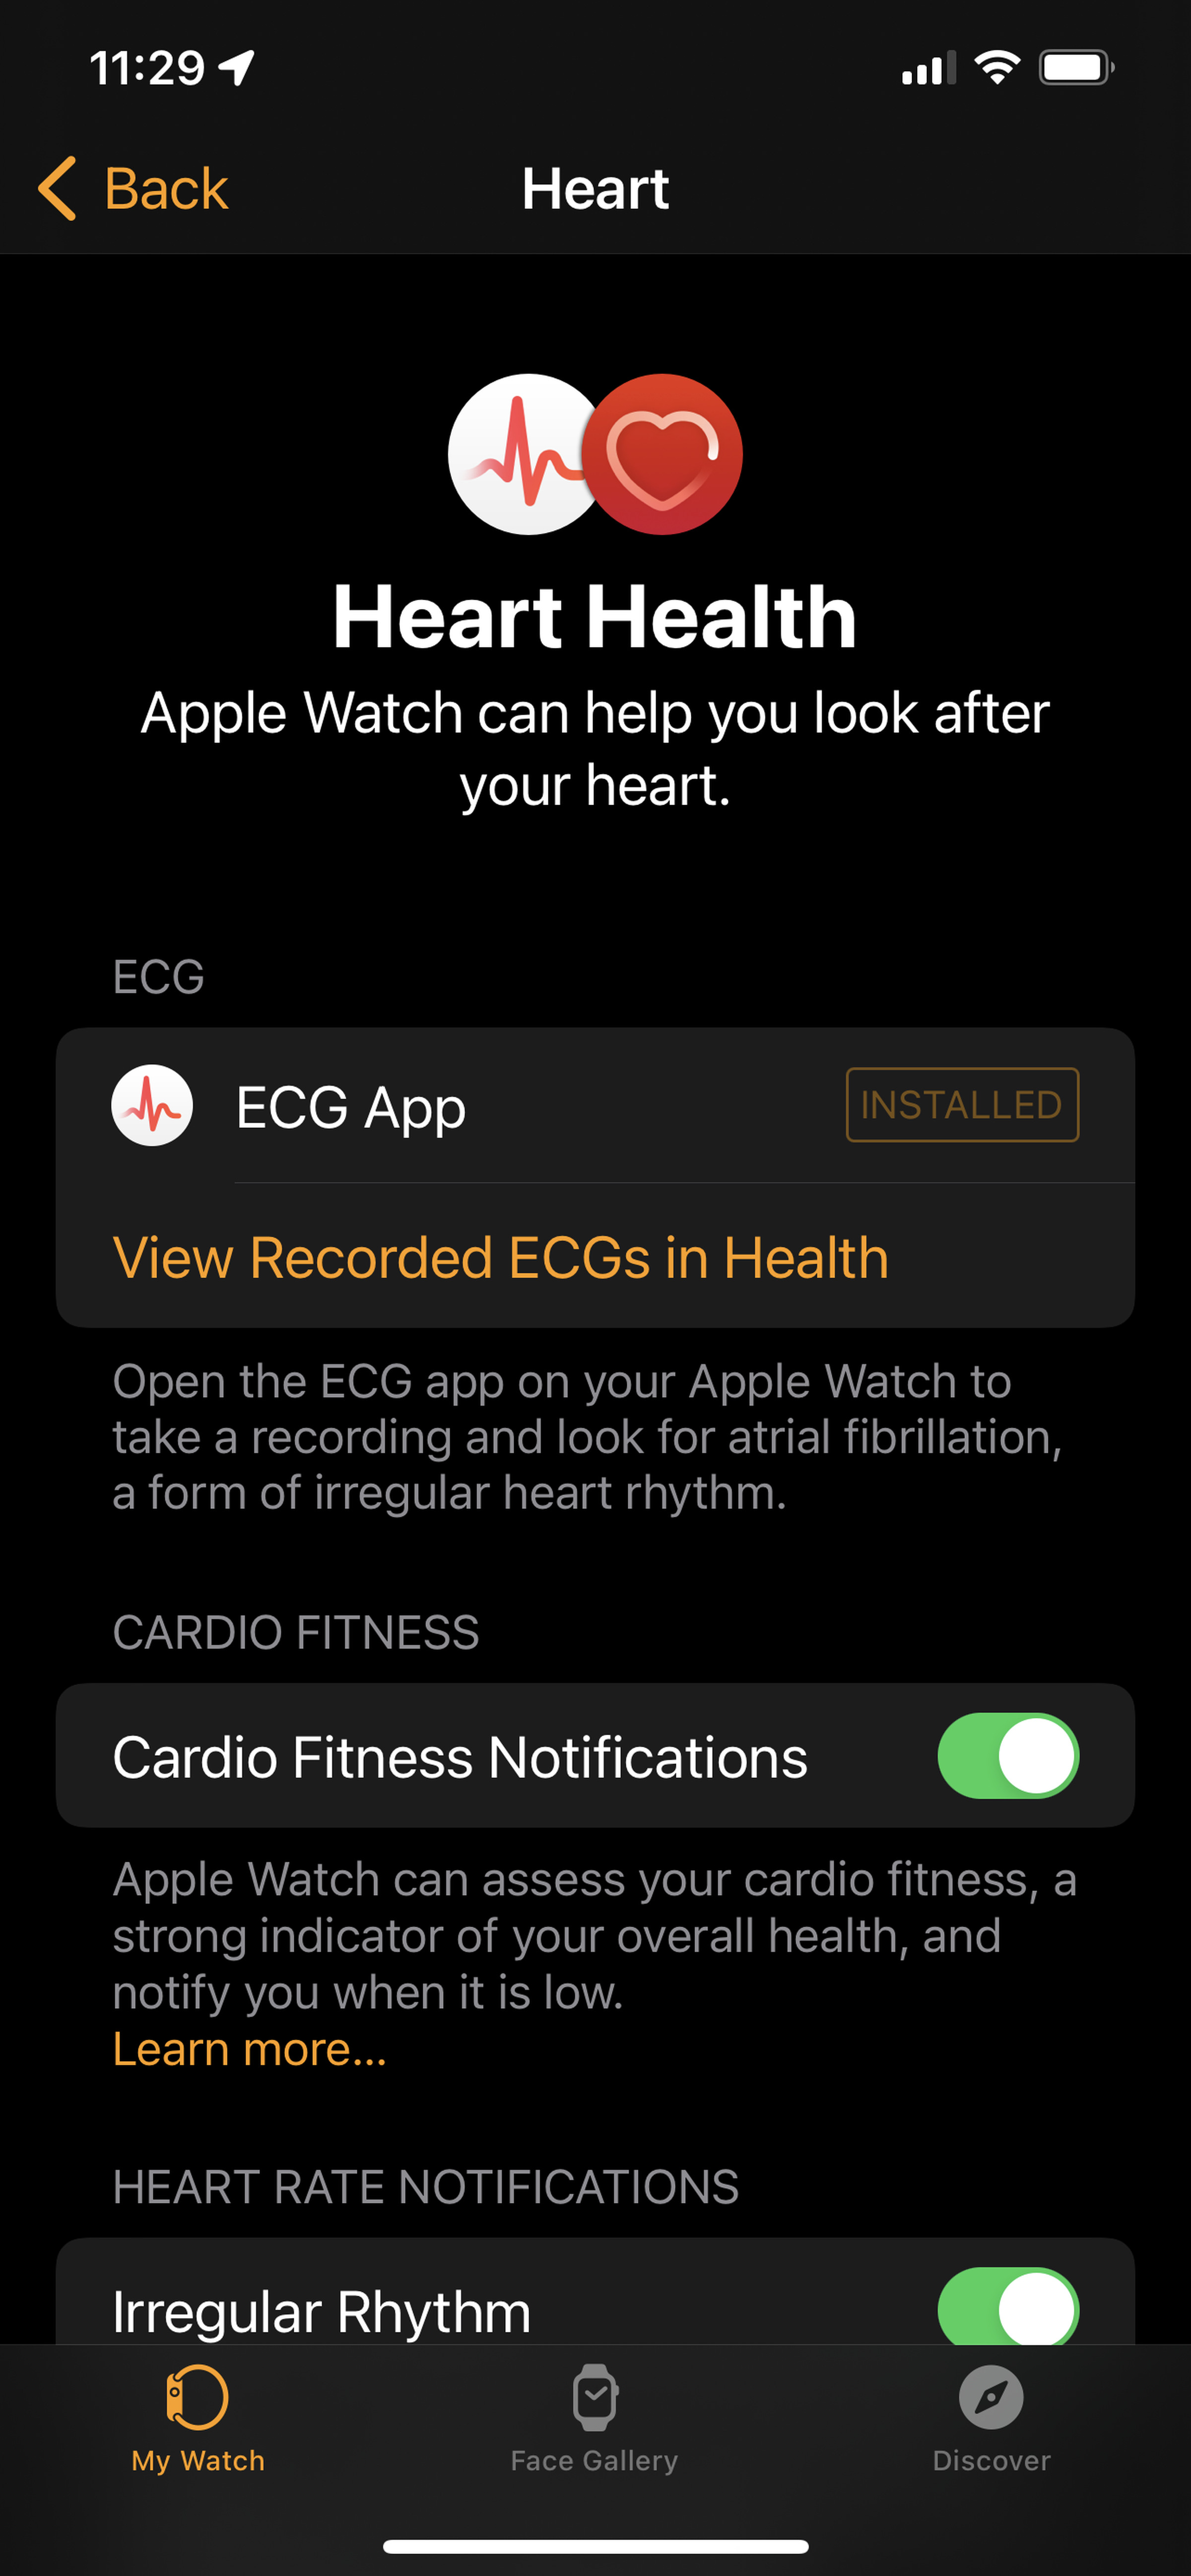 Accessing heart rate settings in the Watch app is easy